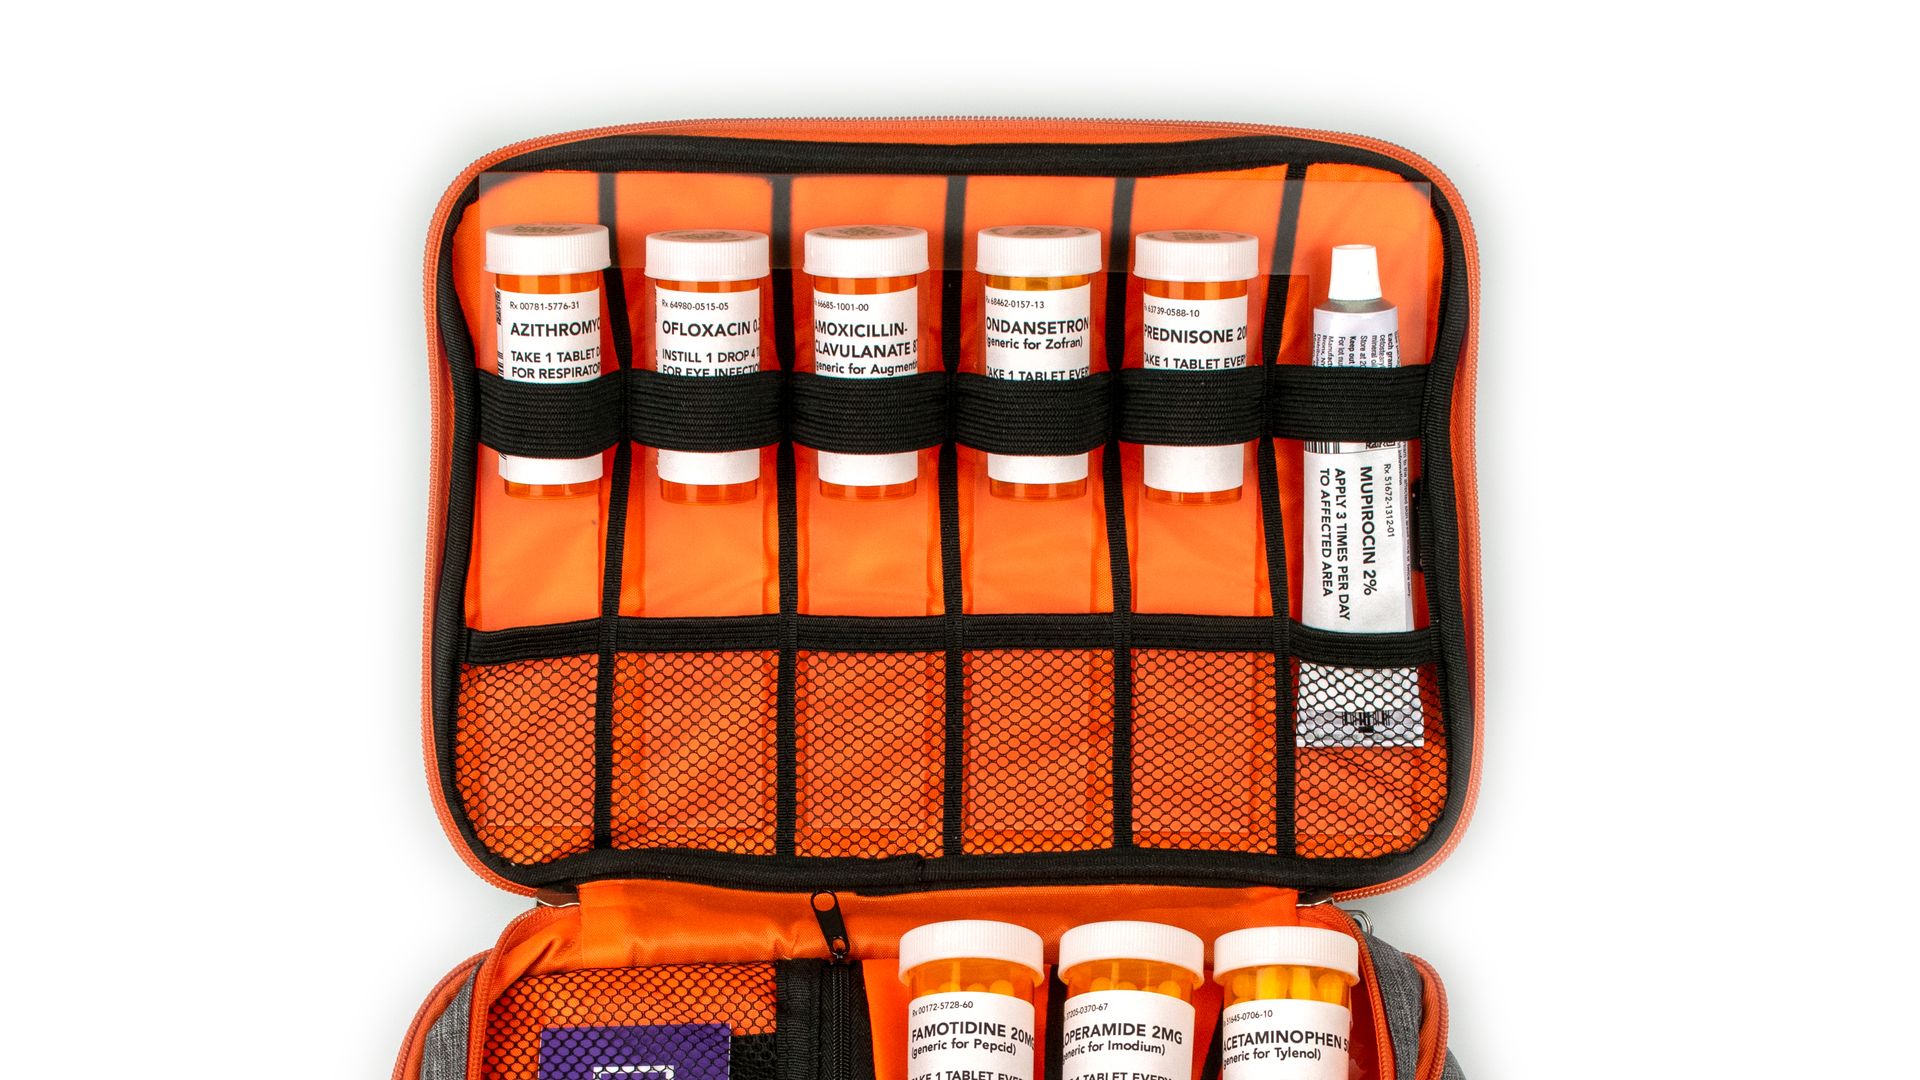 Image of Duration Health's emergency medical kit filled with prescriptions.